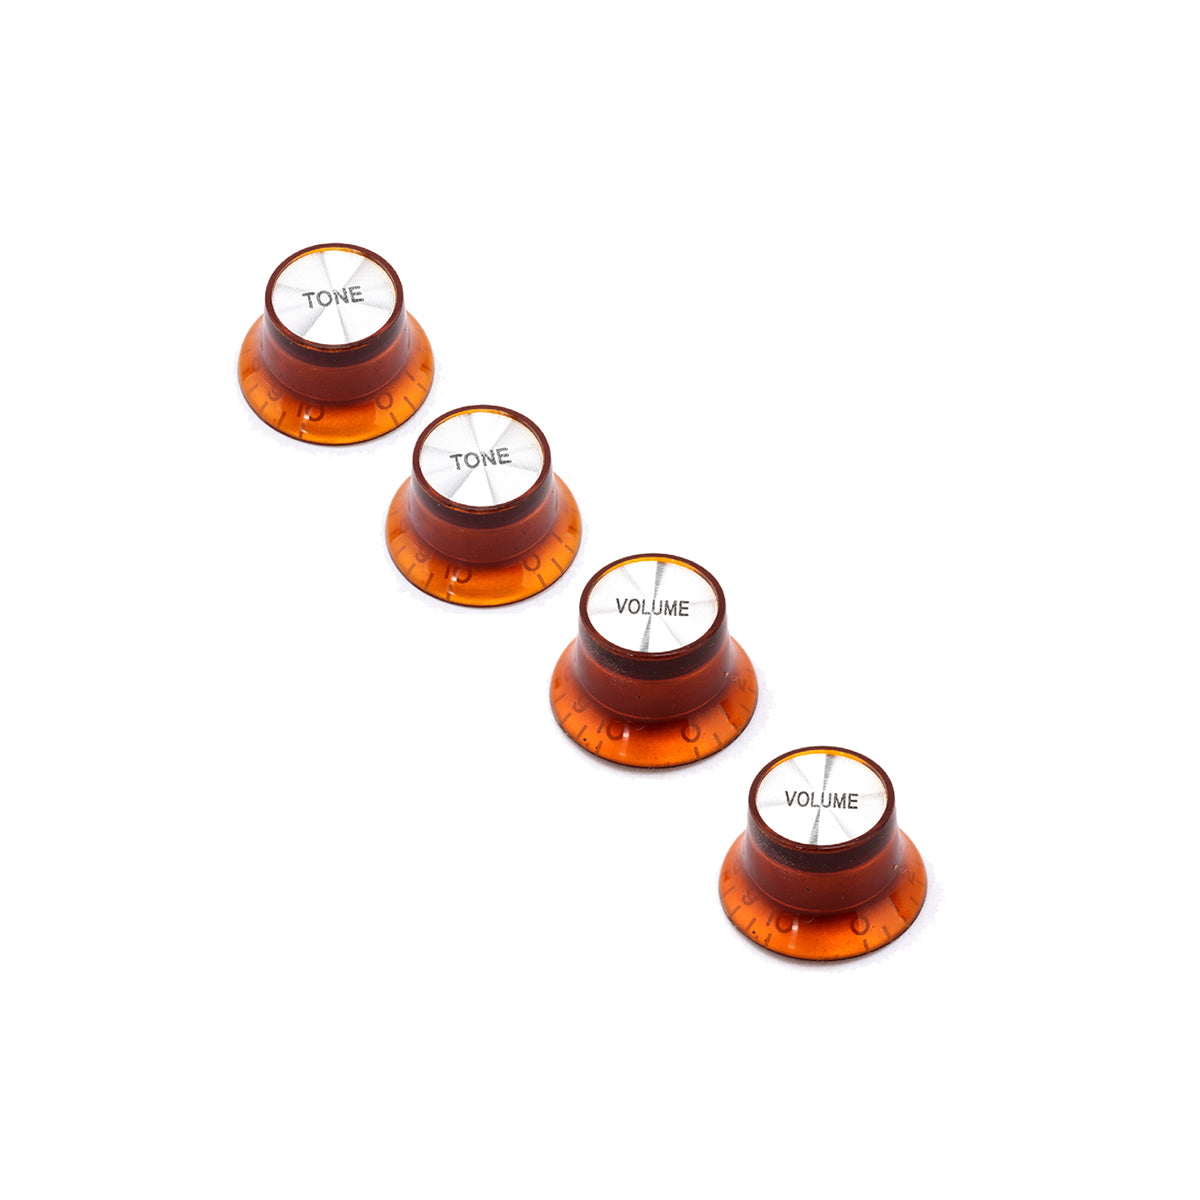 Musiclily Plastic Metric 2 Volume and 2 Tone Control Knobs for Les Paul Style Electric Guitar, Bright Amber